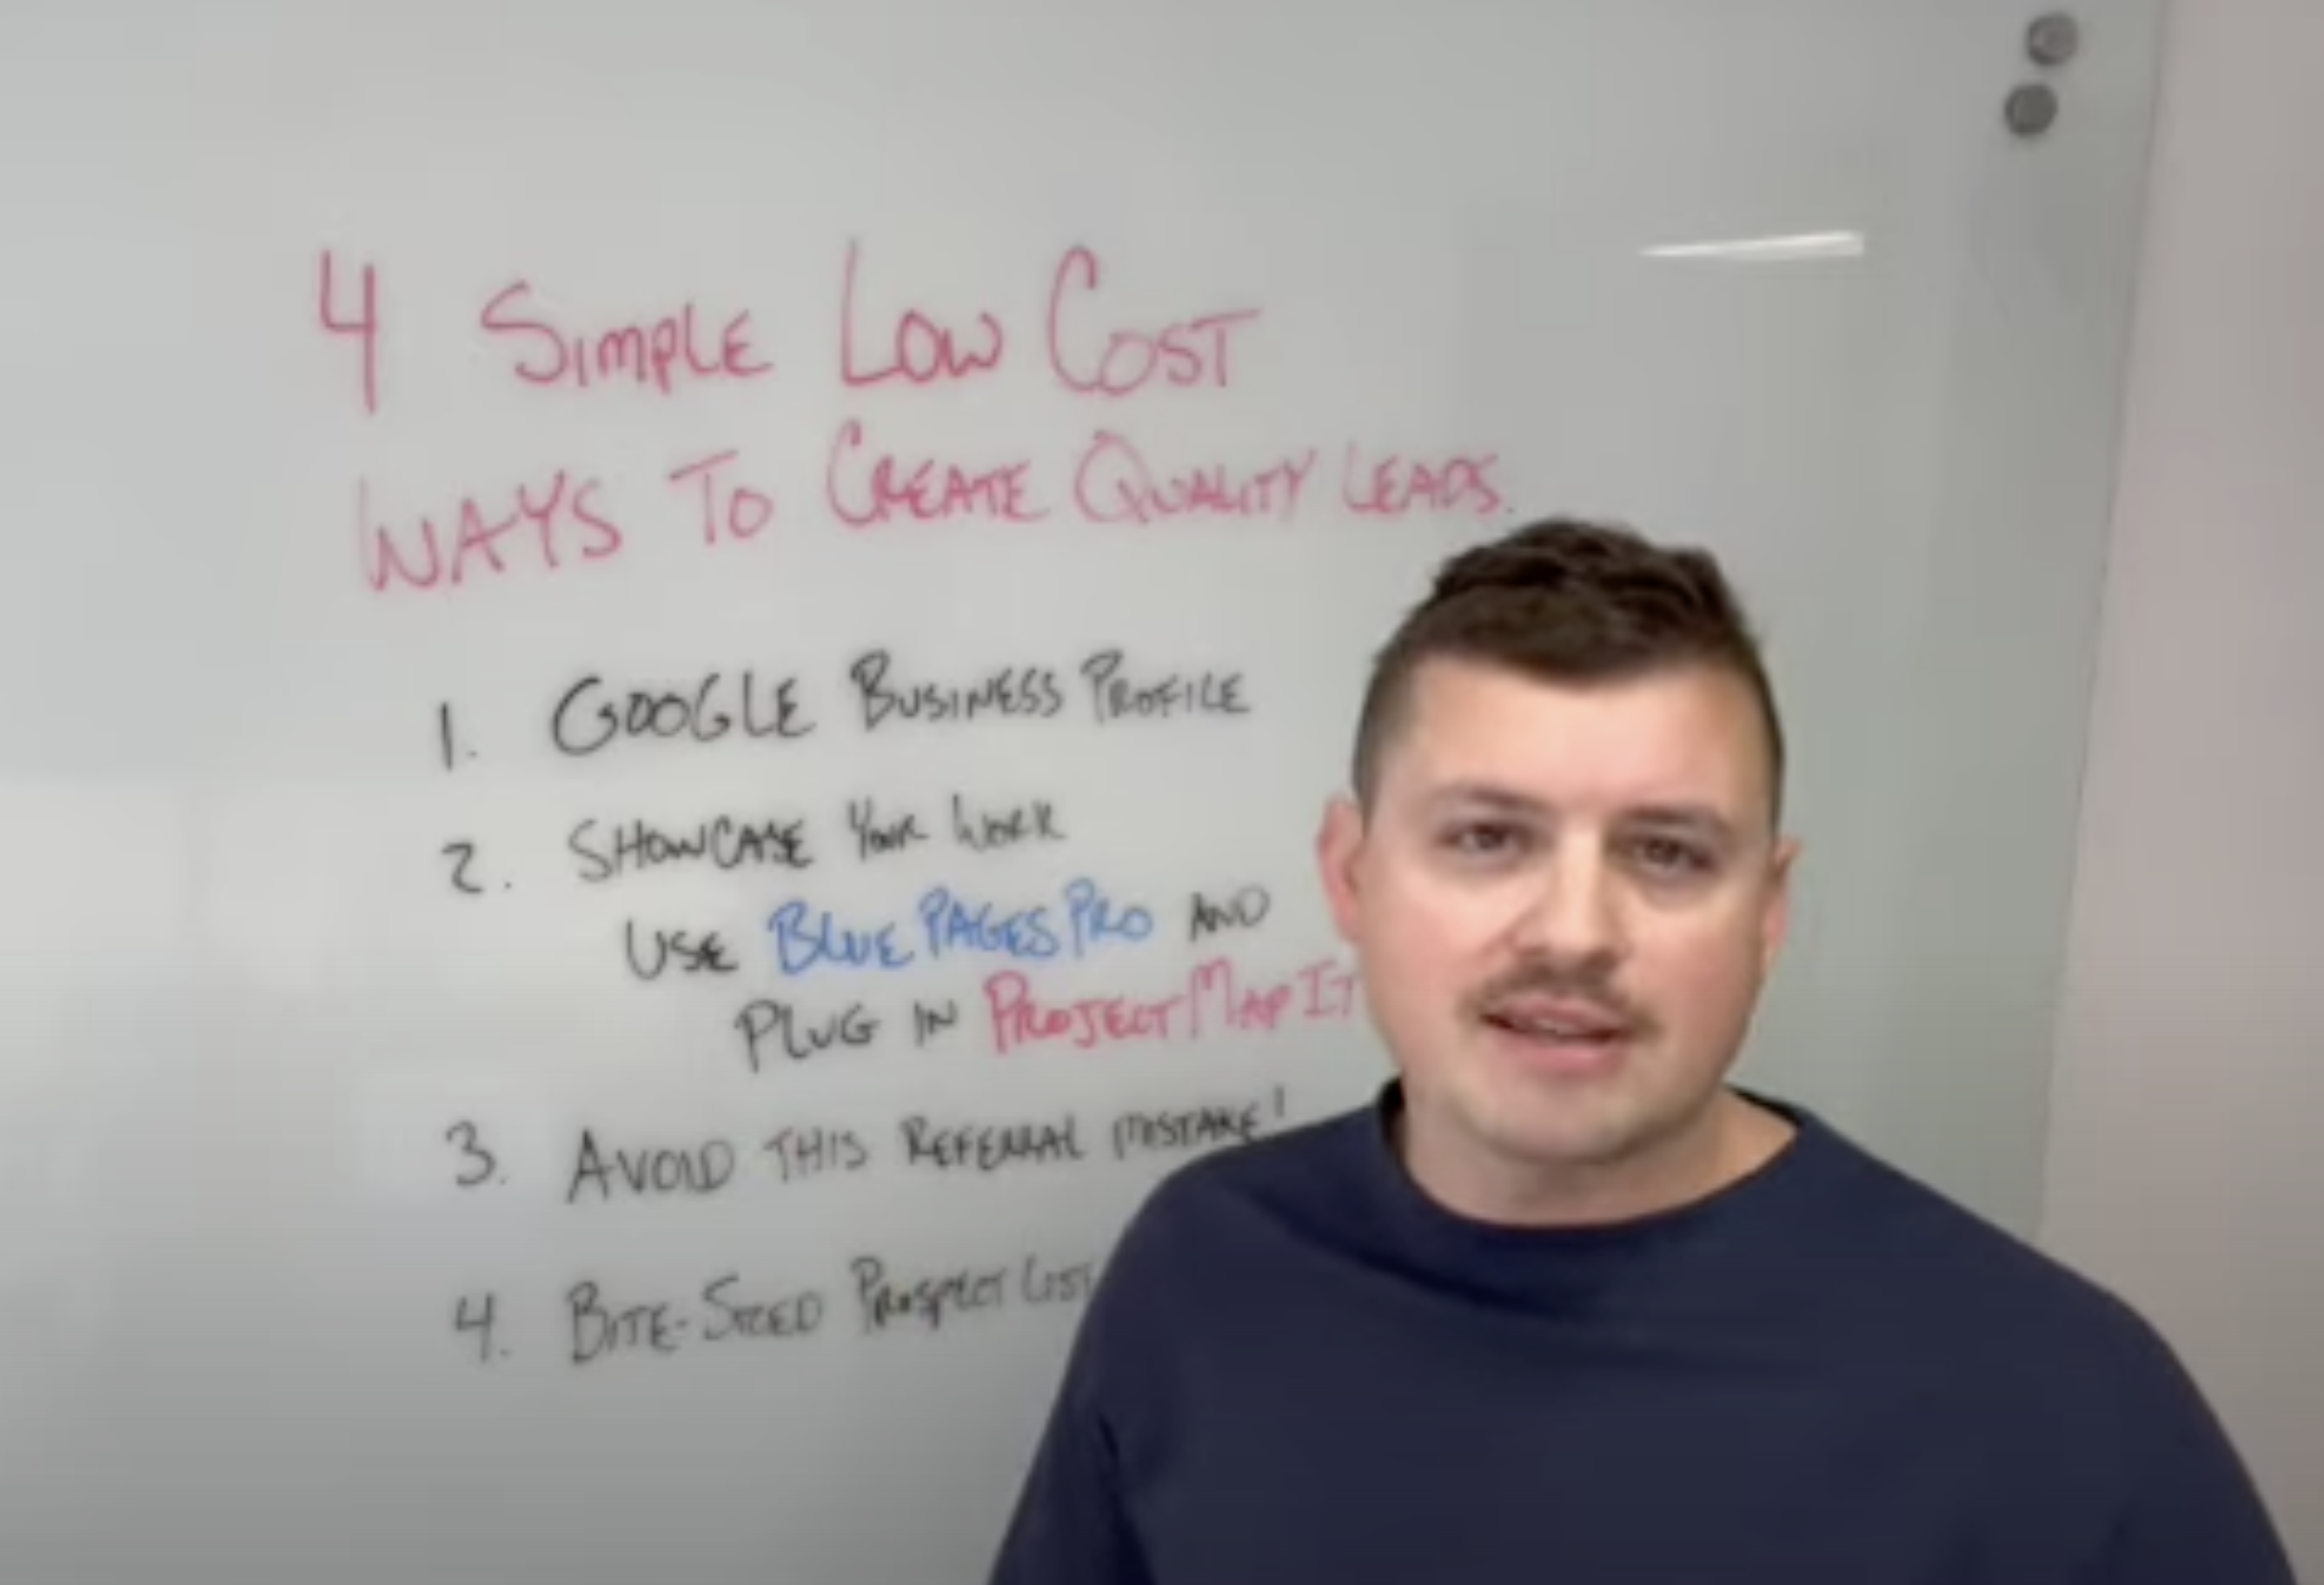 4 Simple Low Cost Ways to Create Quality Leads